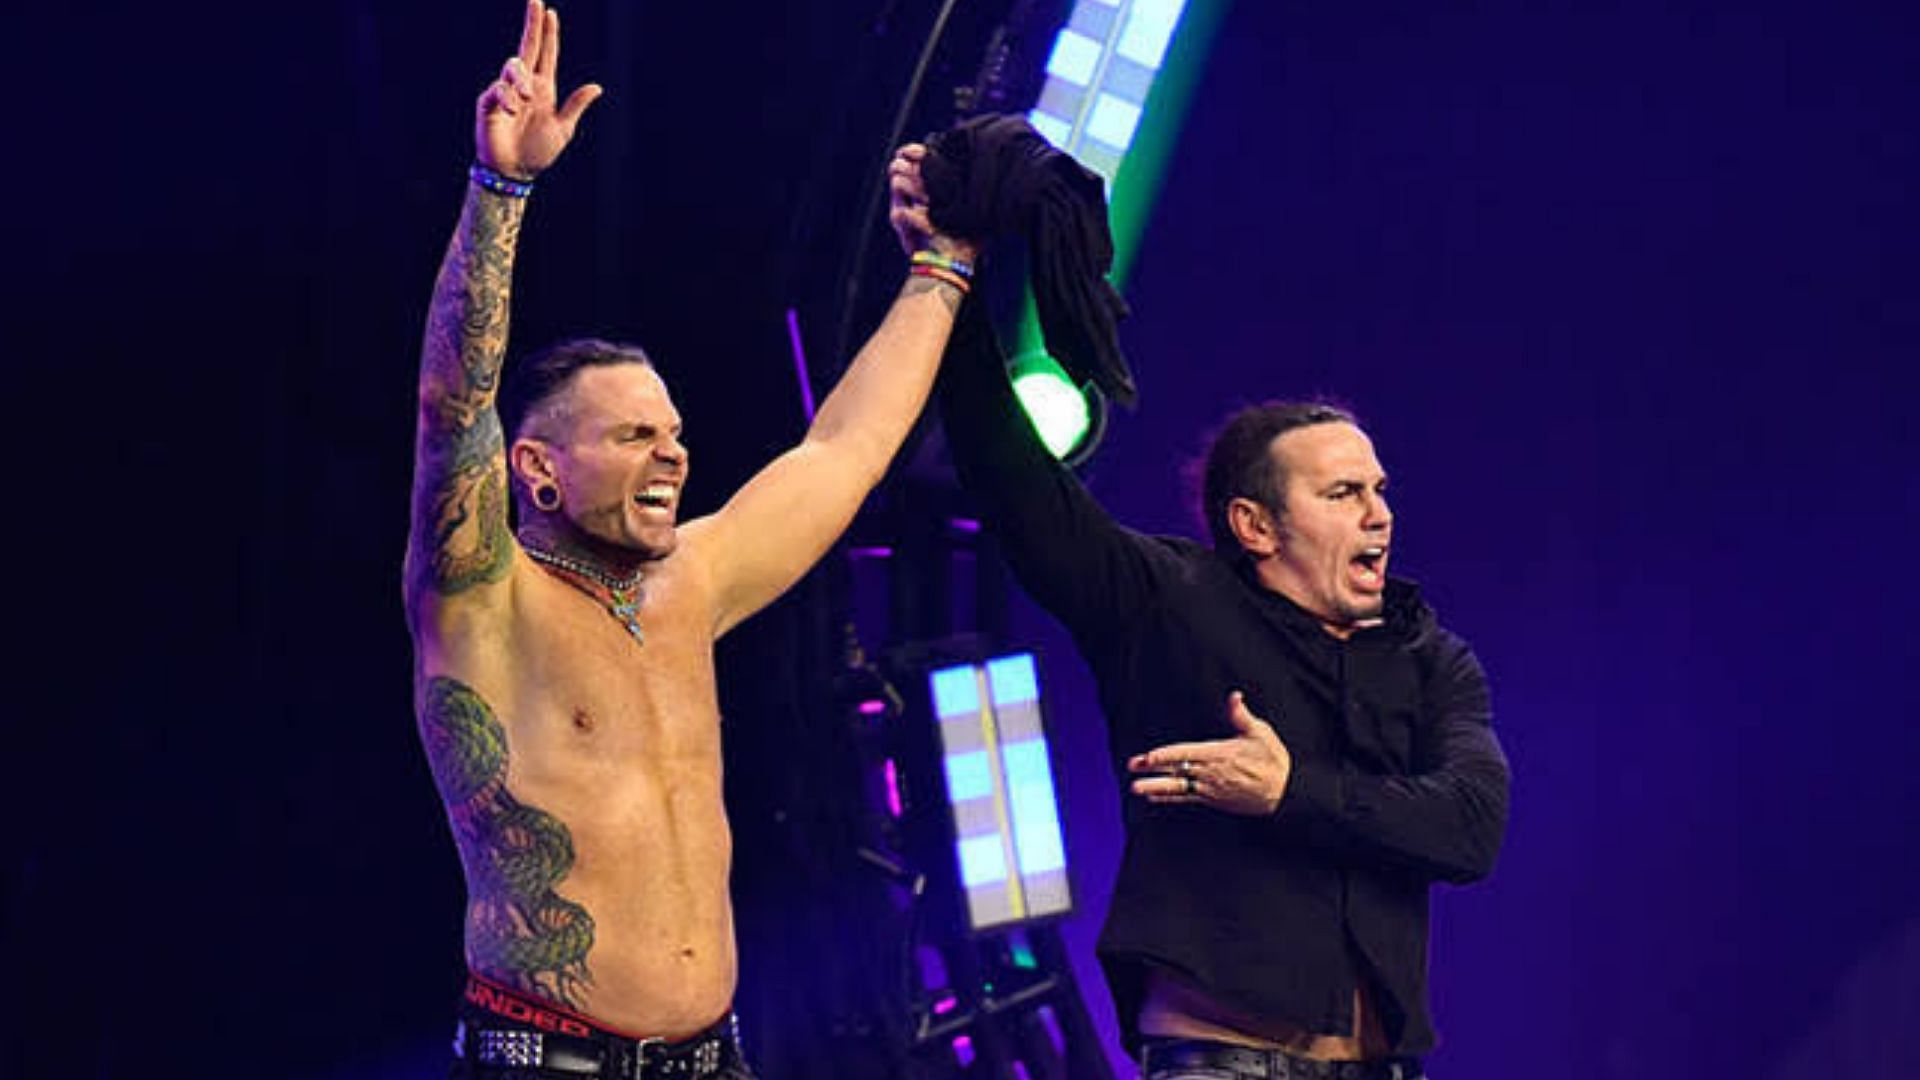 Jeff Hardy and Matt Hardy have reunited in AEW